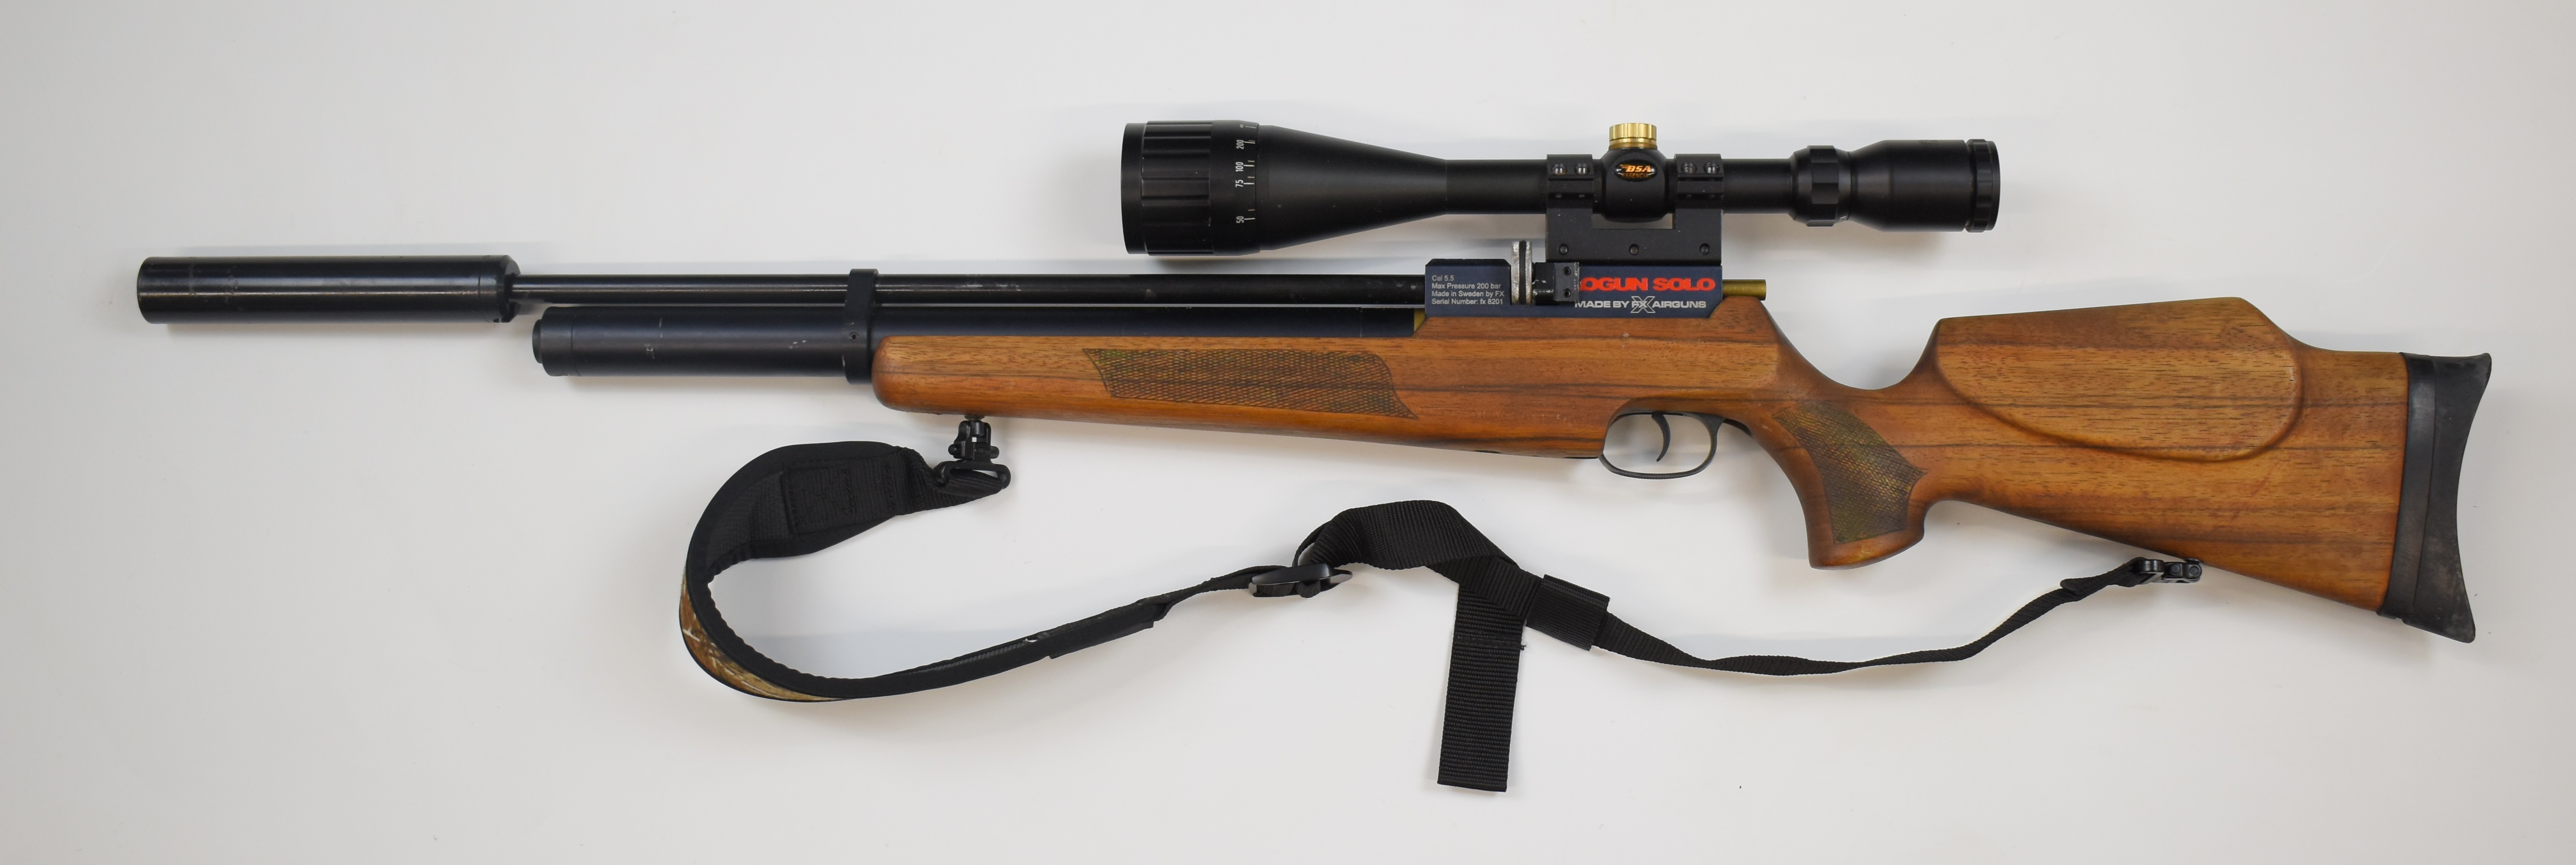 FX Logun Solo .22 PCP air rifle with chequered semi-pistol grip and forend, raised cheek piece, - Image 6 of 10